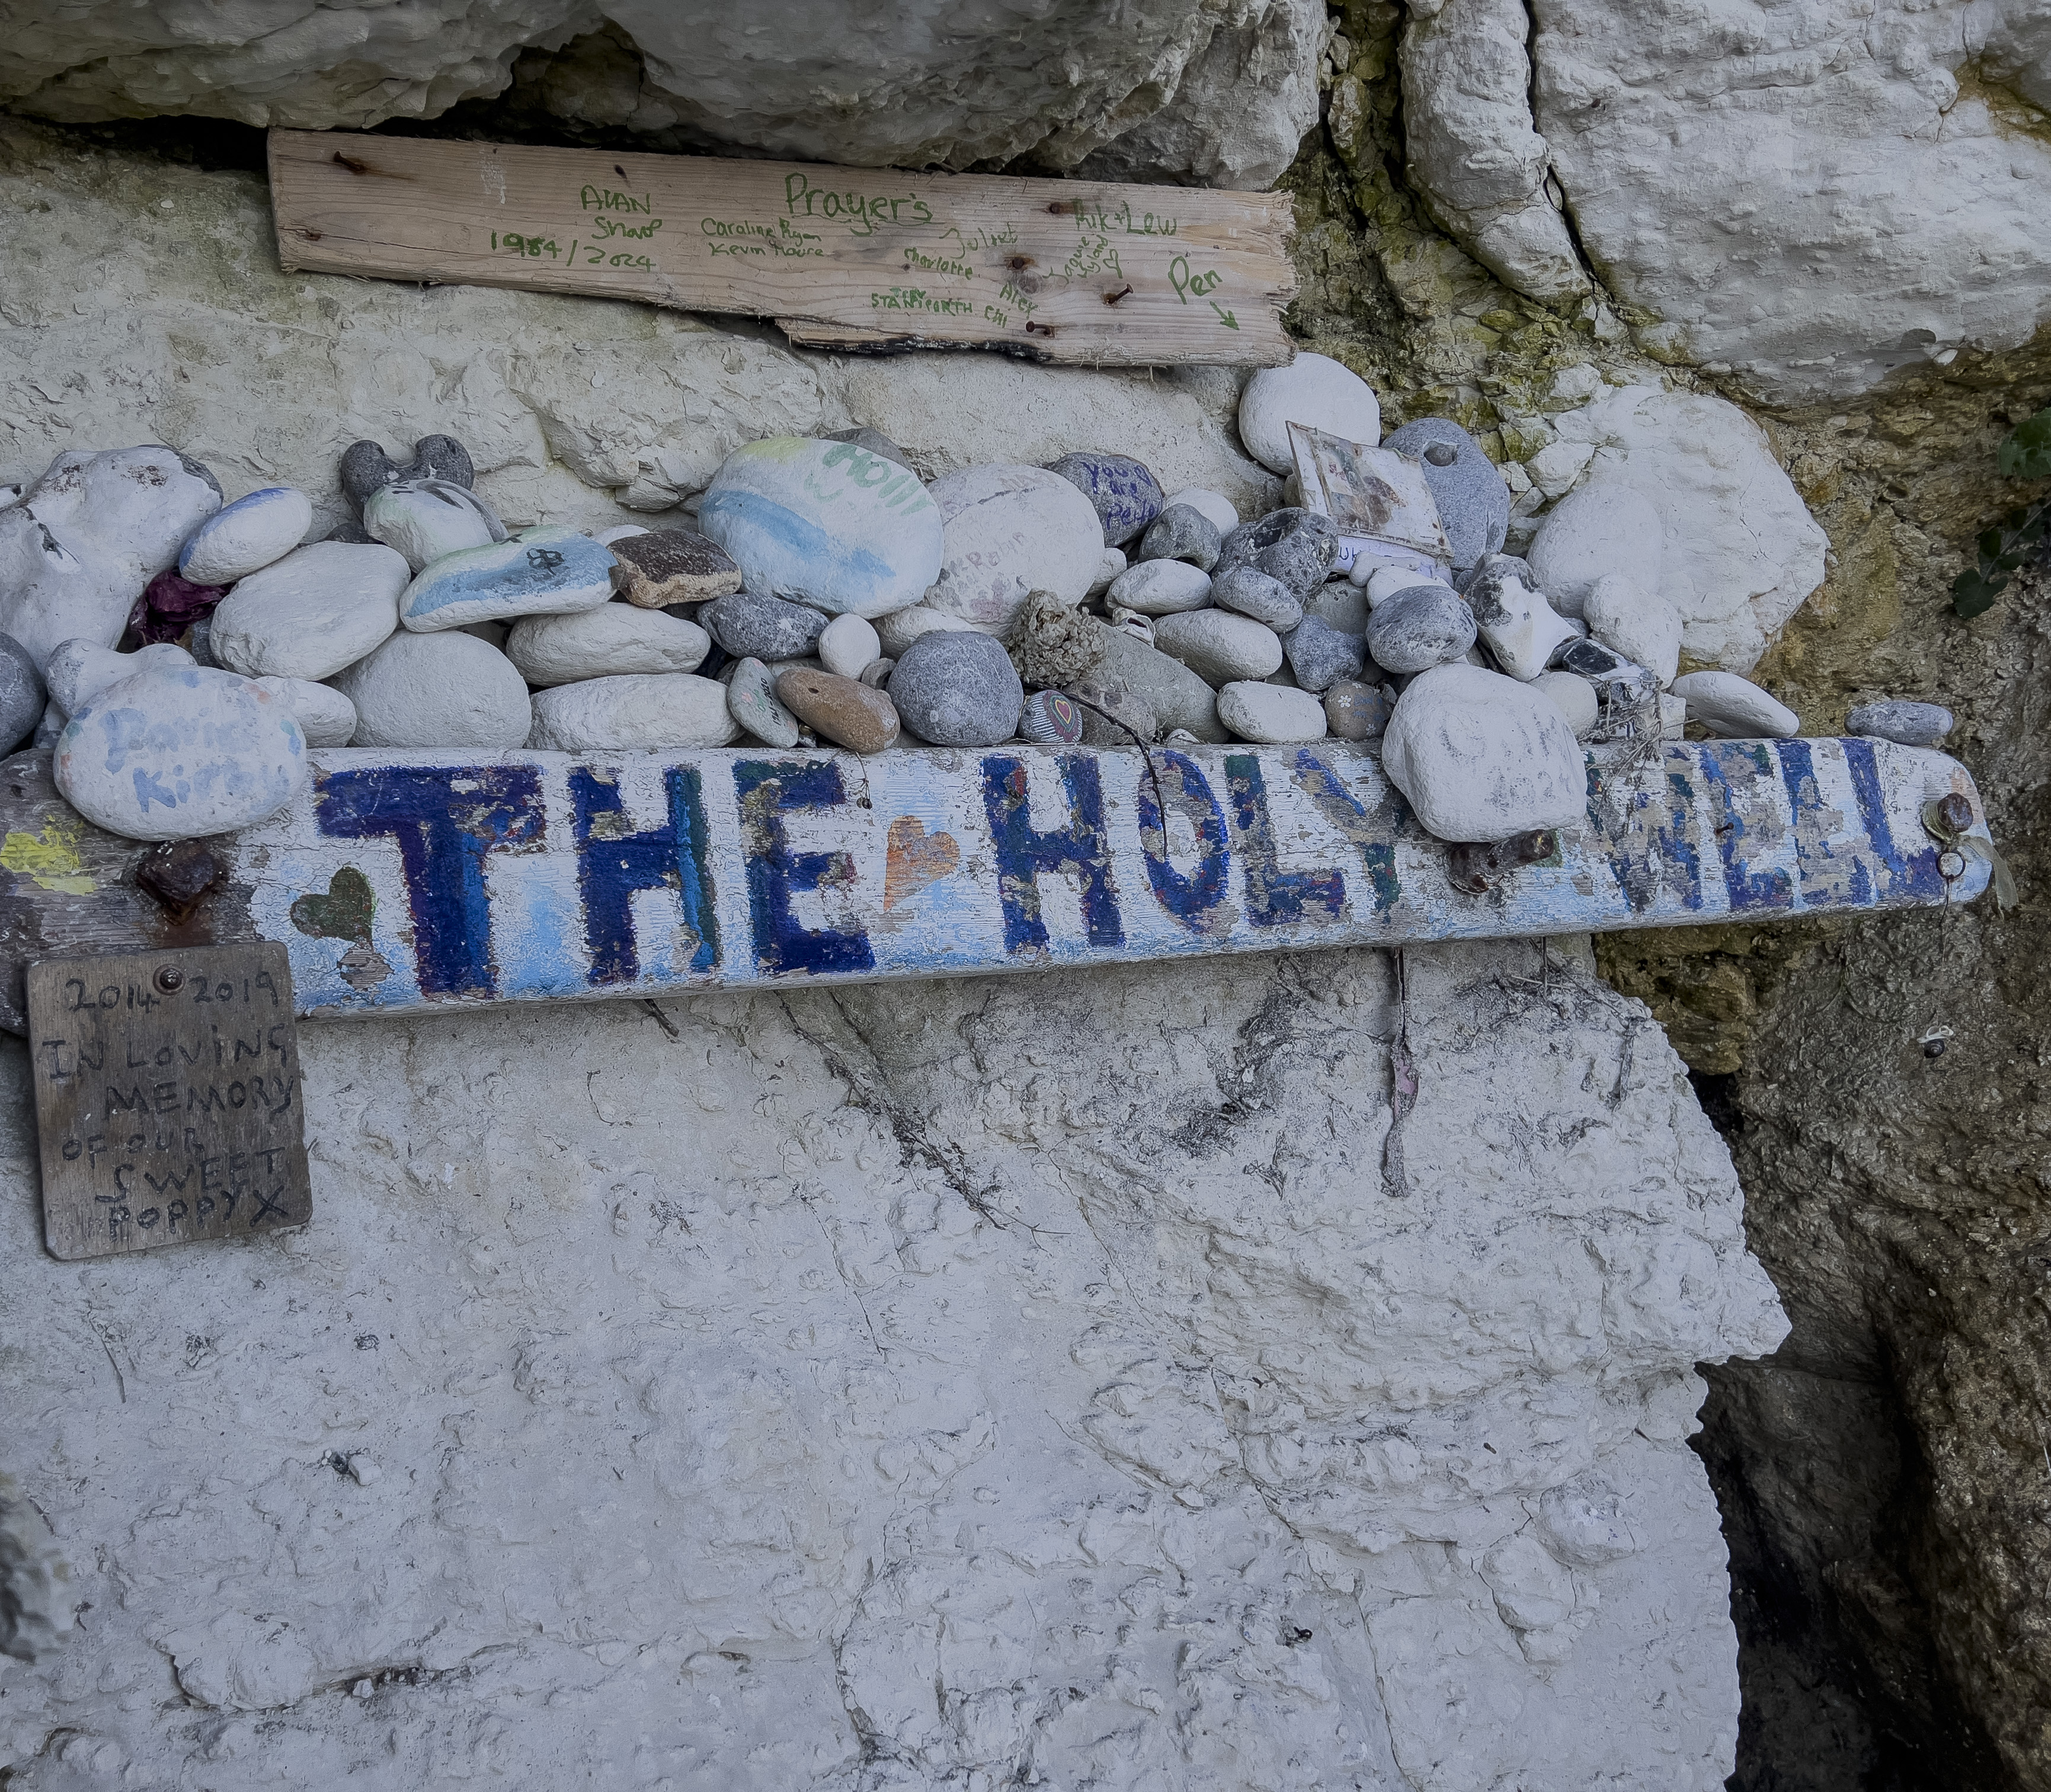 The Holywell Sign